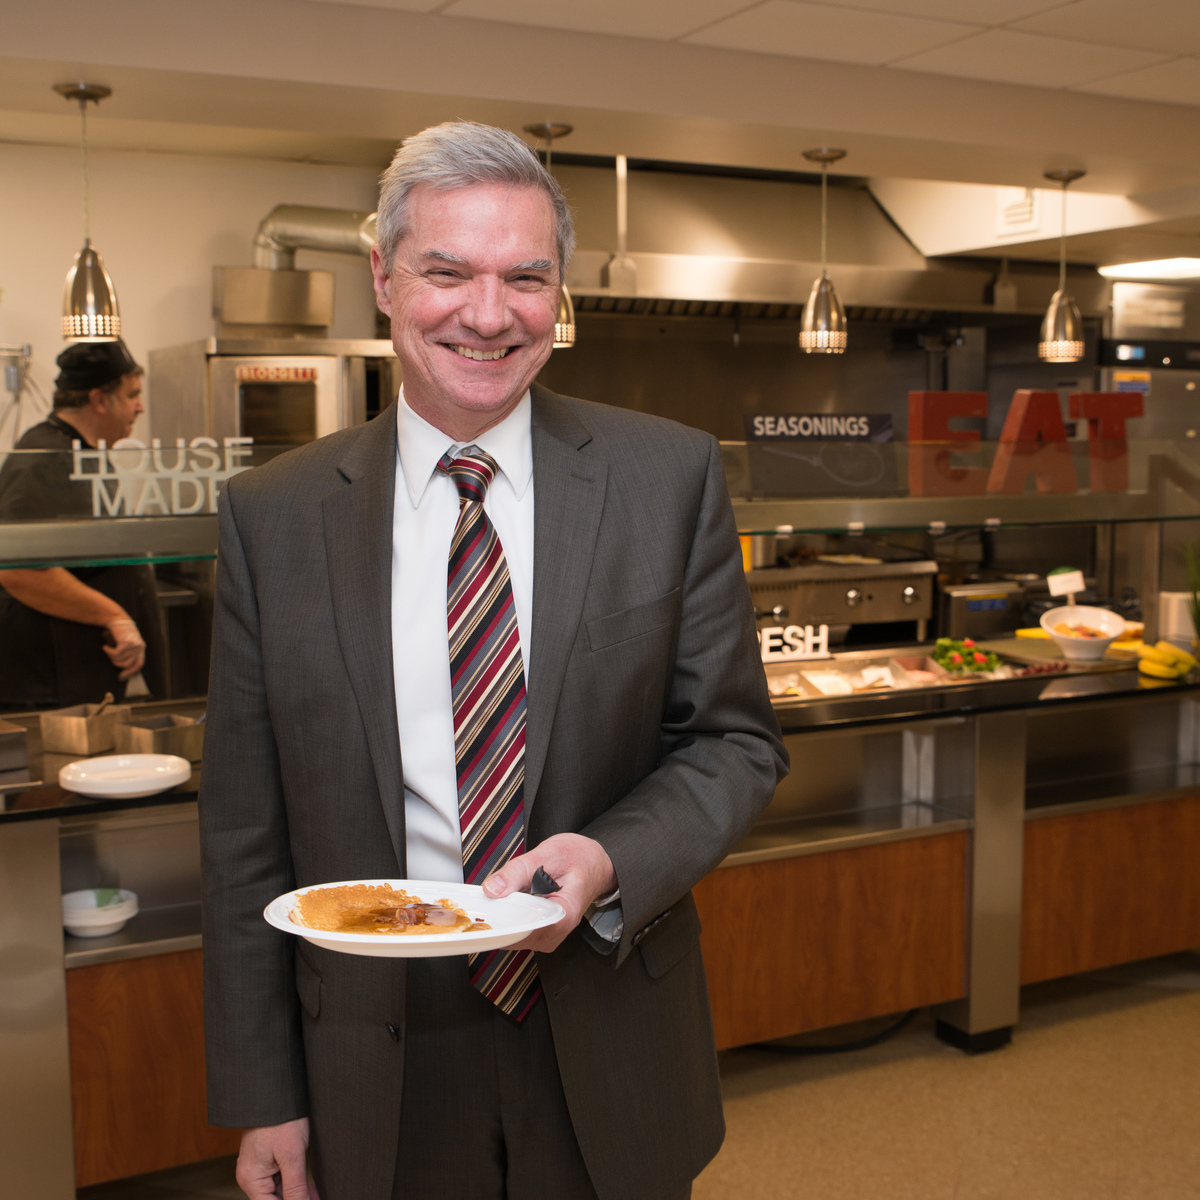 SJC President Donald R. Boomgaarden, Ph.D., with his pancakes.